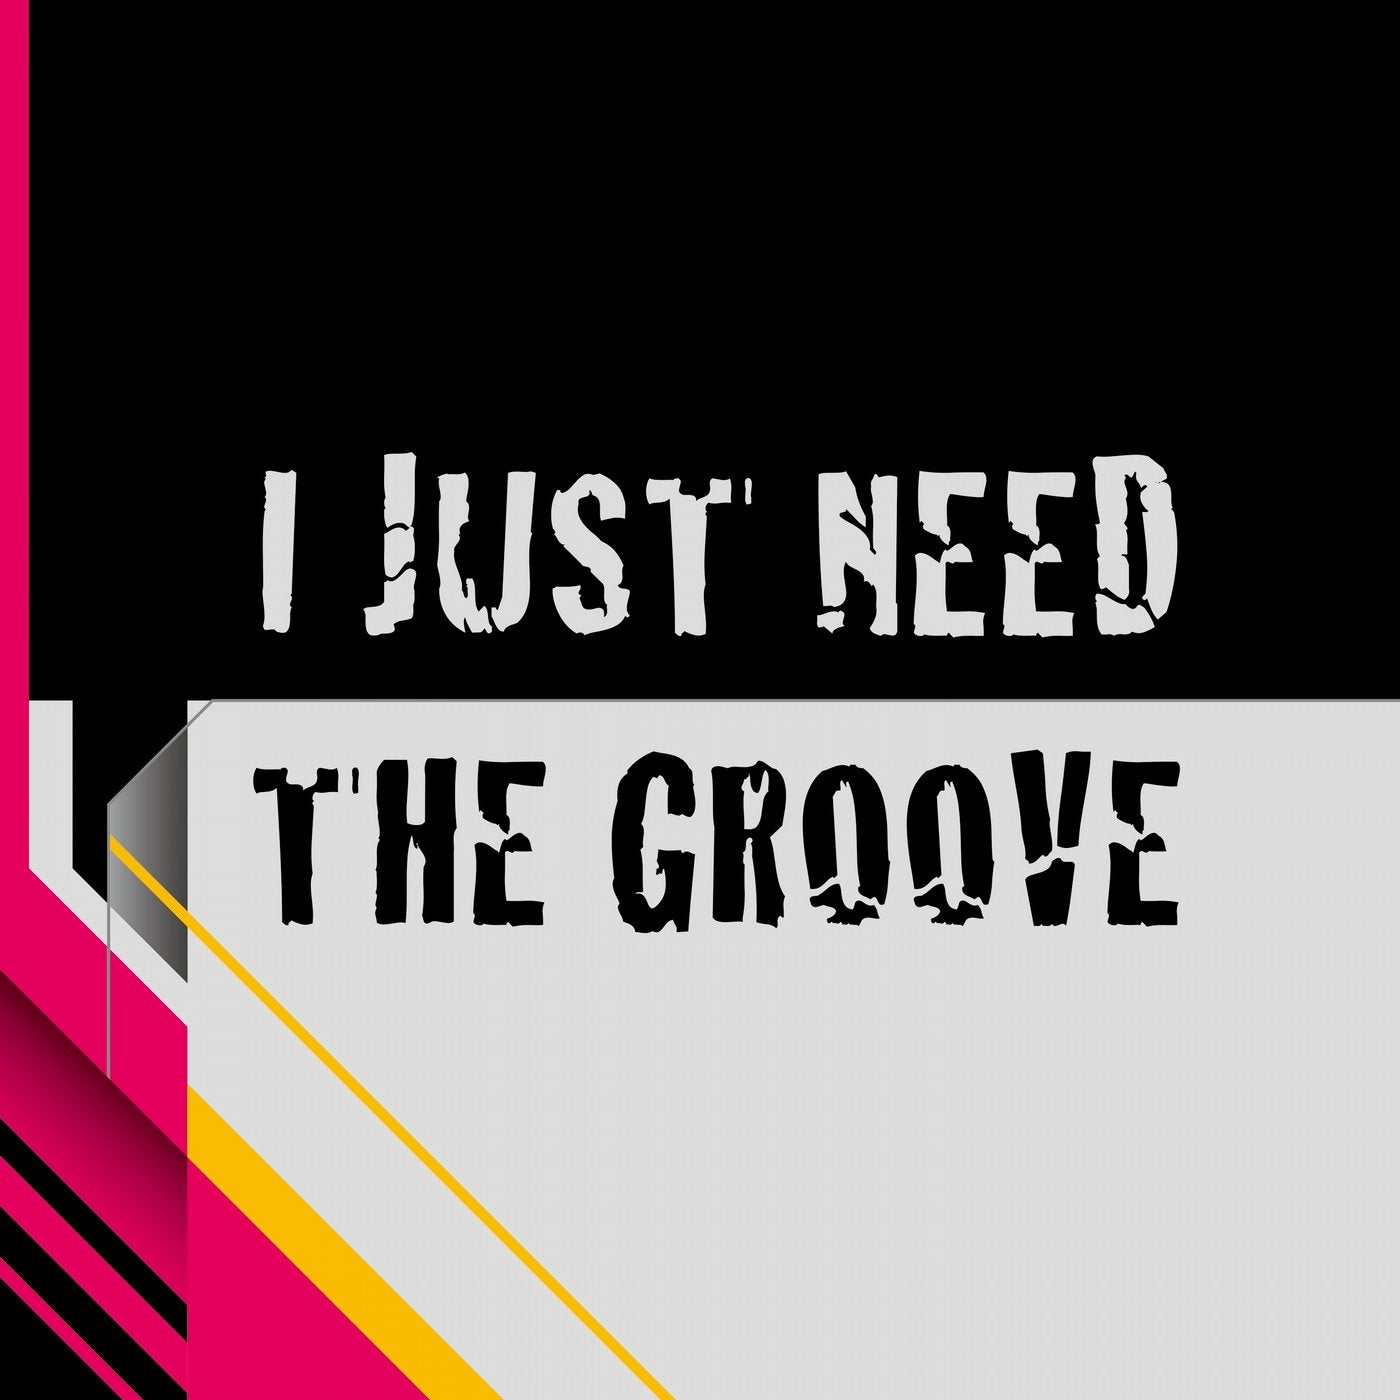 I Just Need the Groove